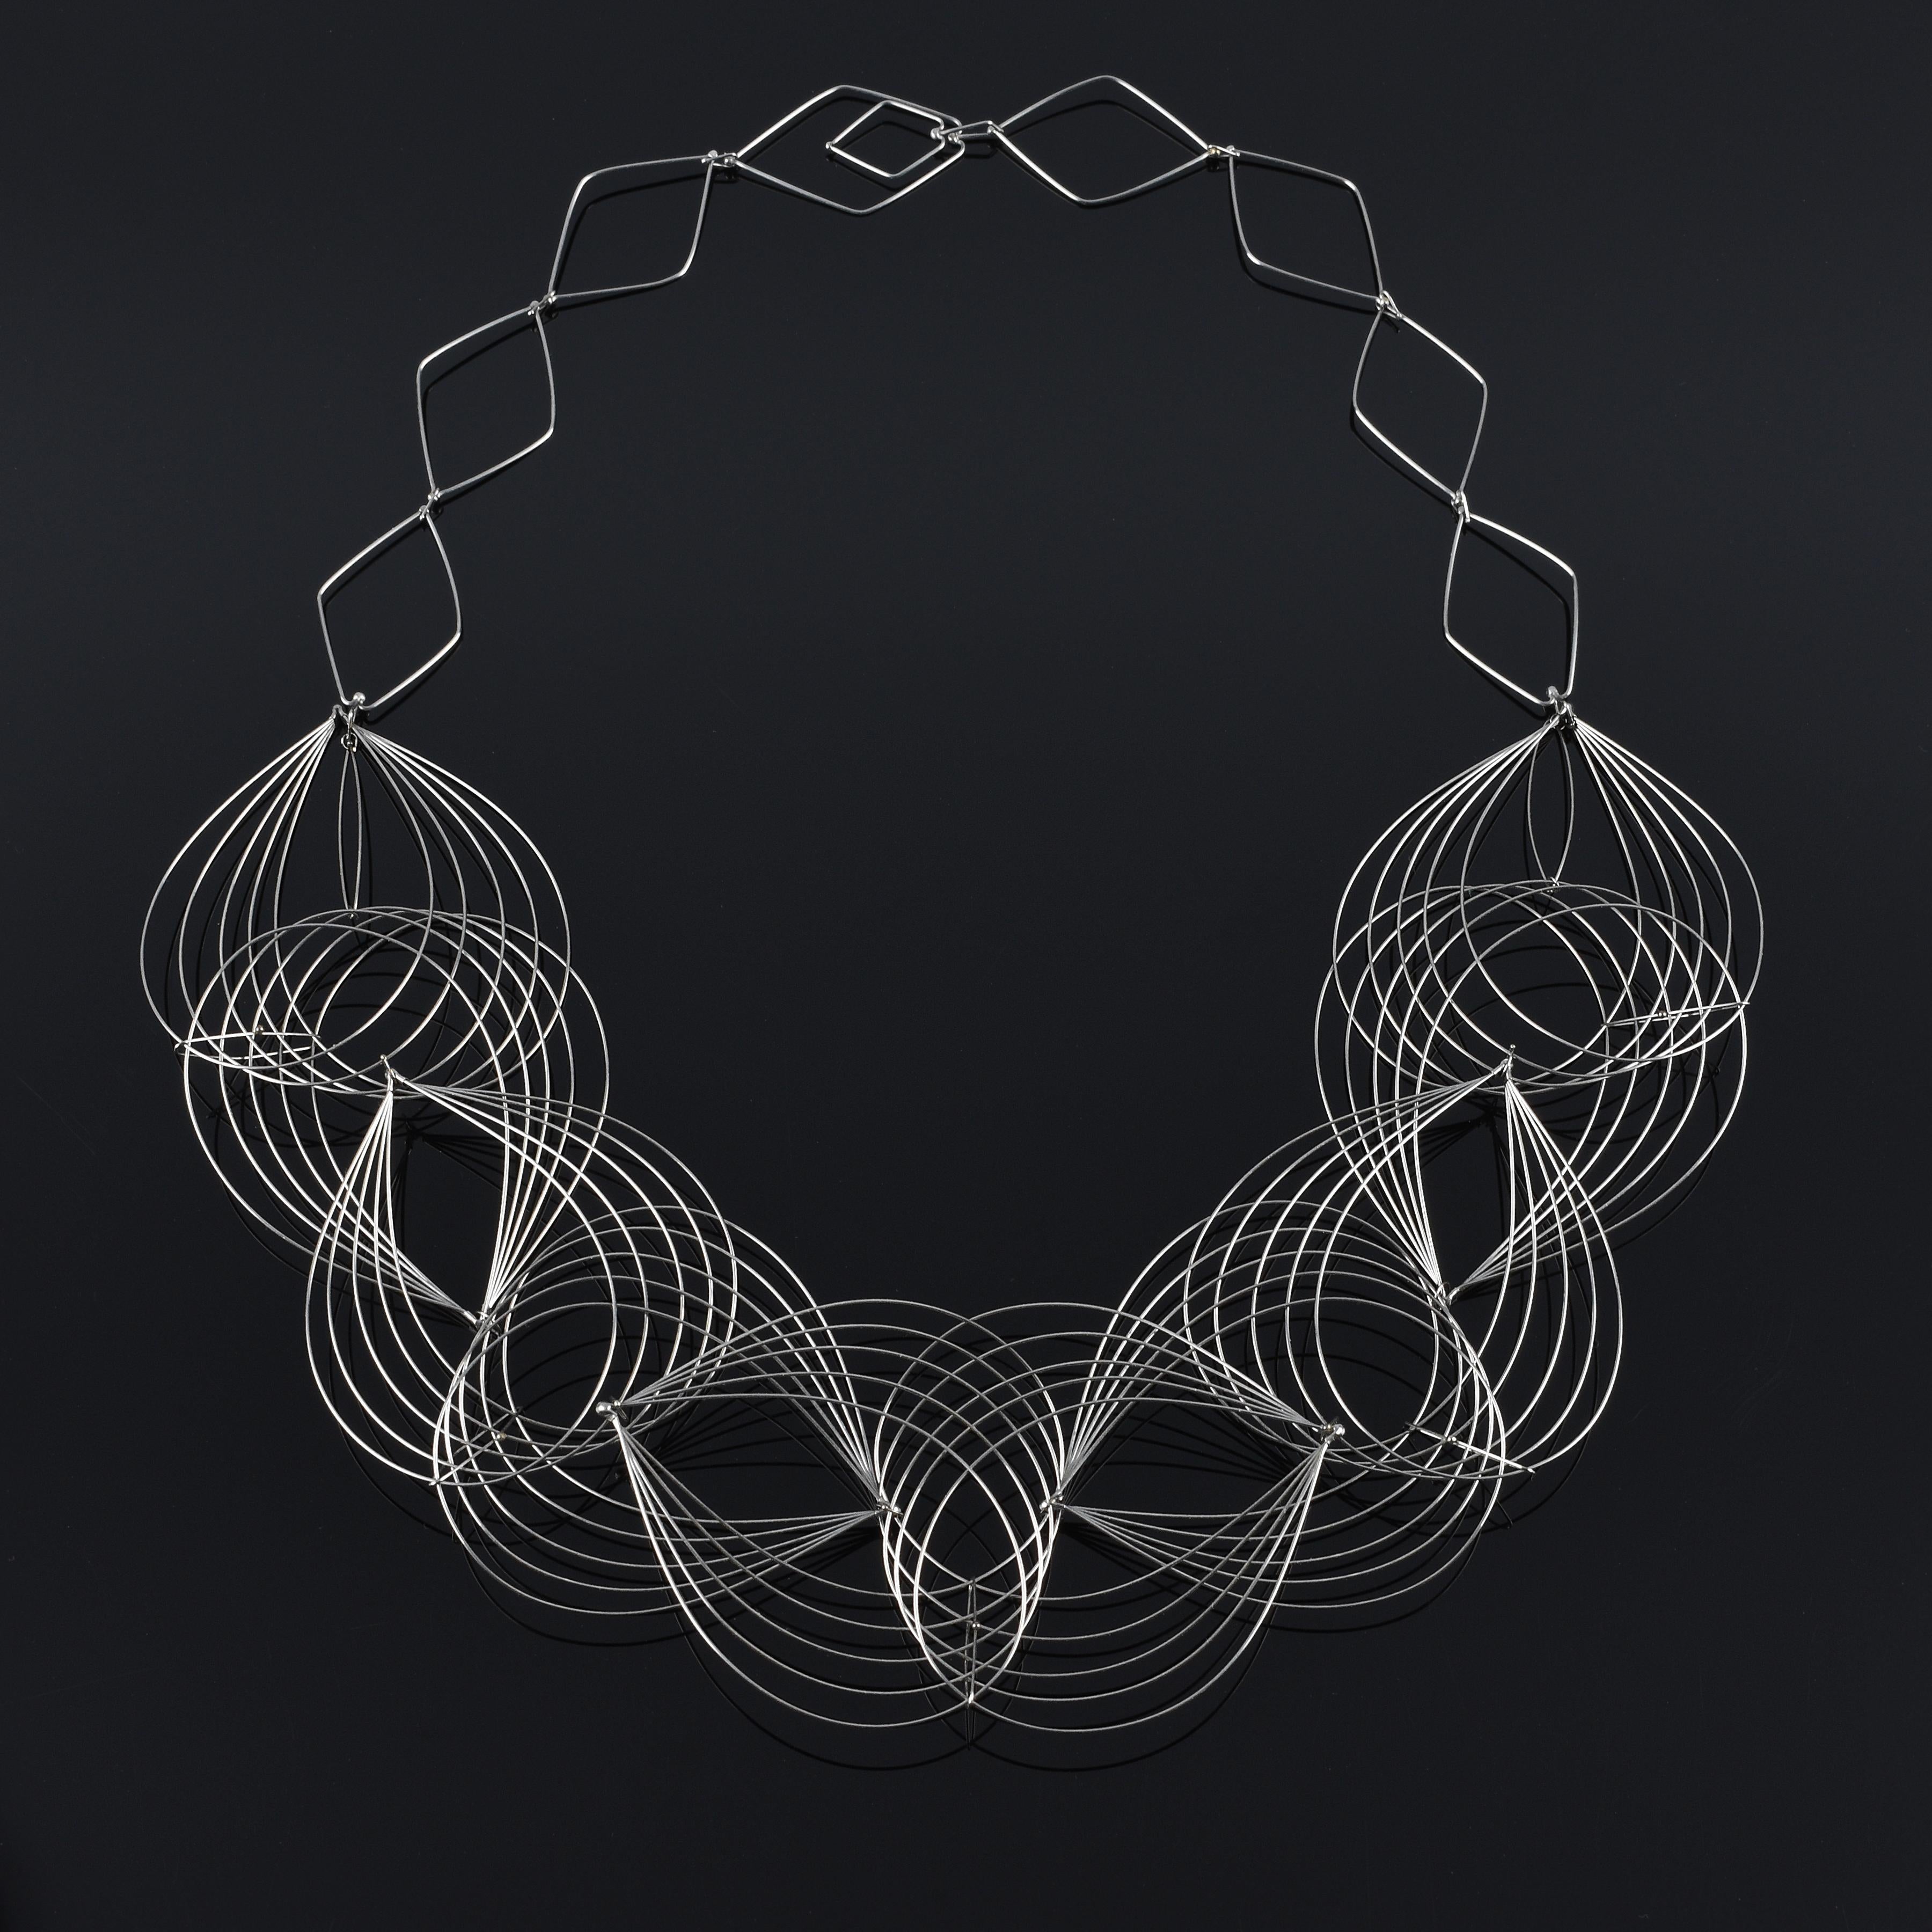 Julie Lake Abstract Sculpture - "Trace Necklace " a contemporary, fine gauge stainless steel necklace